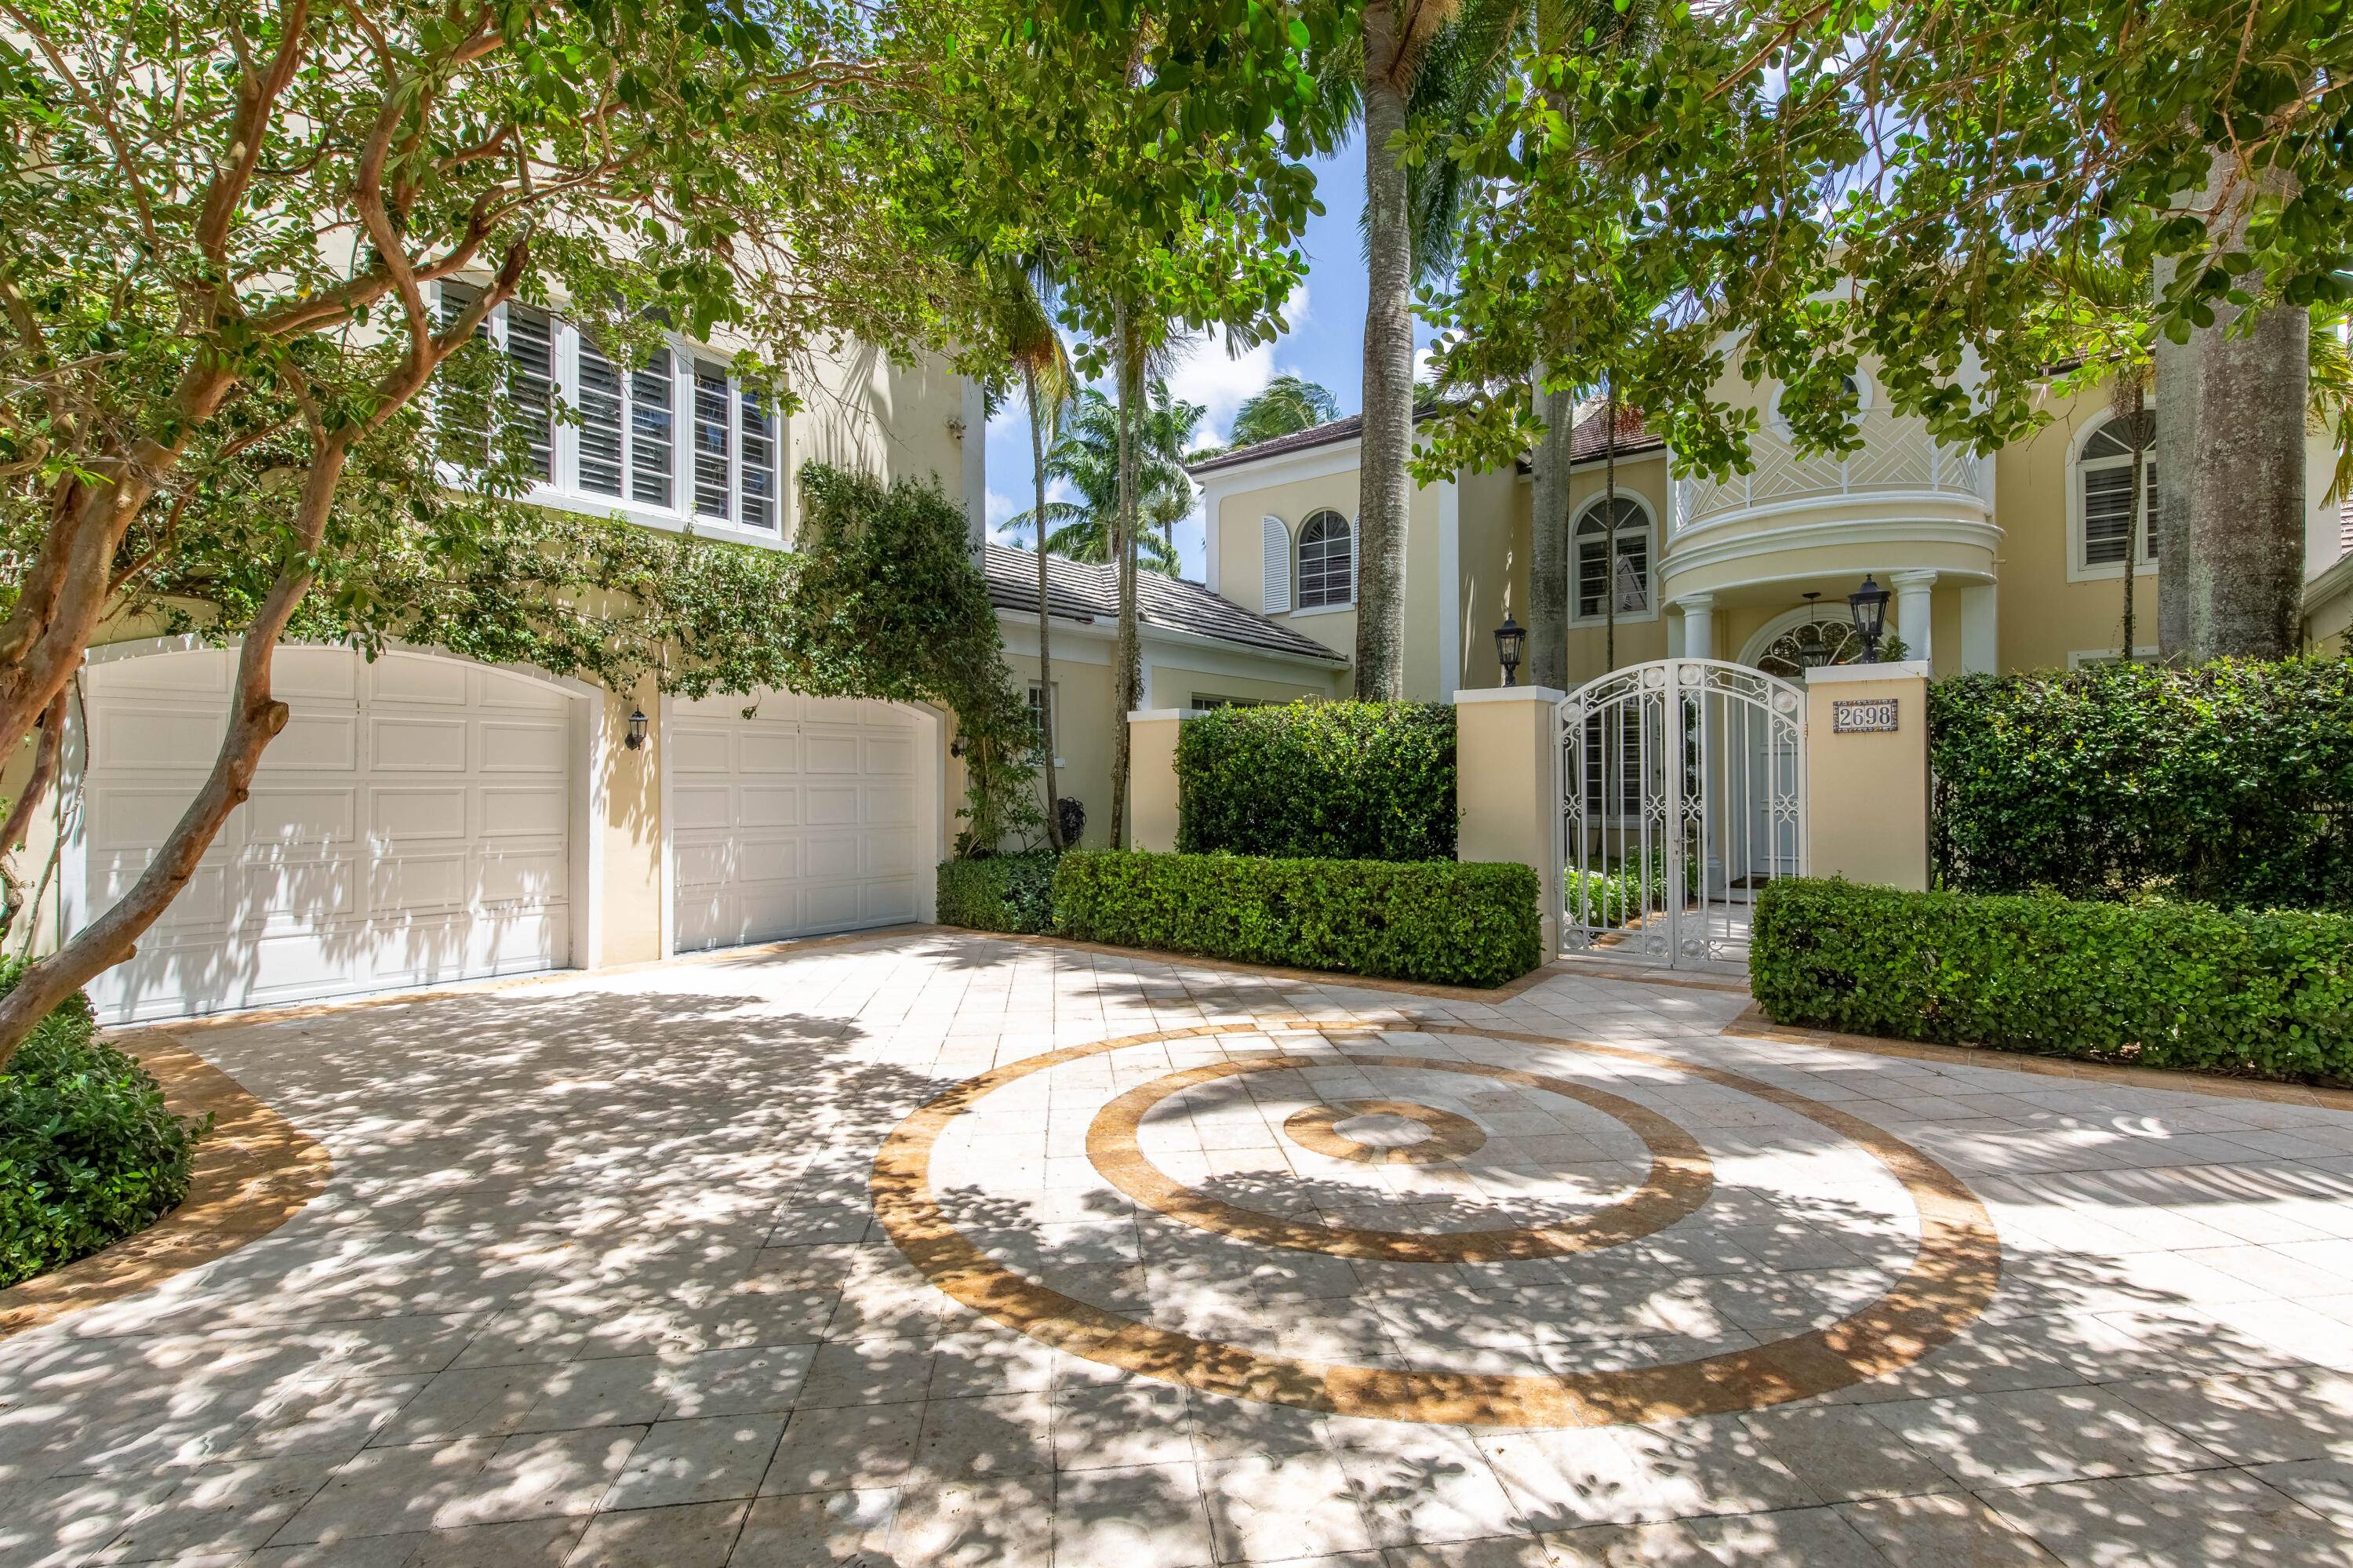 Located in the prestigious neighborhood of Kensington within the private gates of the Palm Beach Polo Club, this elegant estate is situated on over half an acre and boasts 8, ...